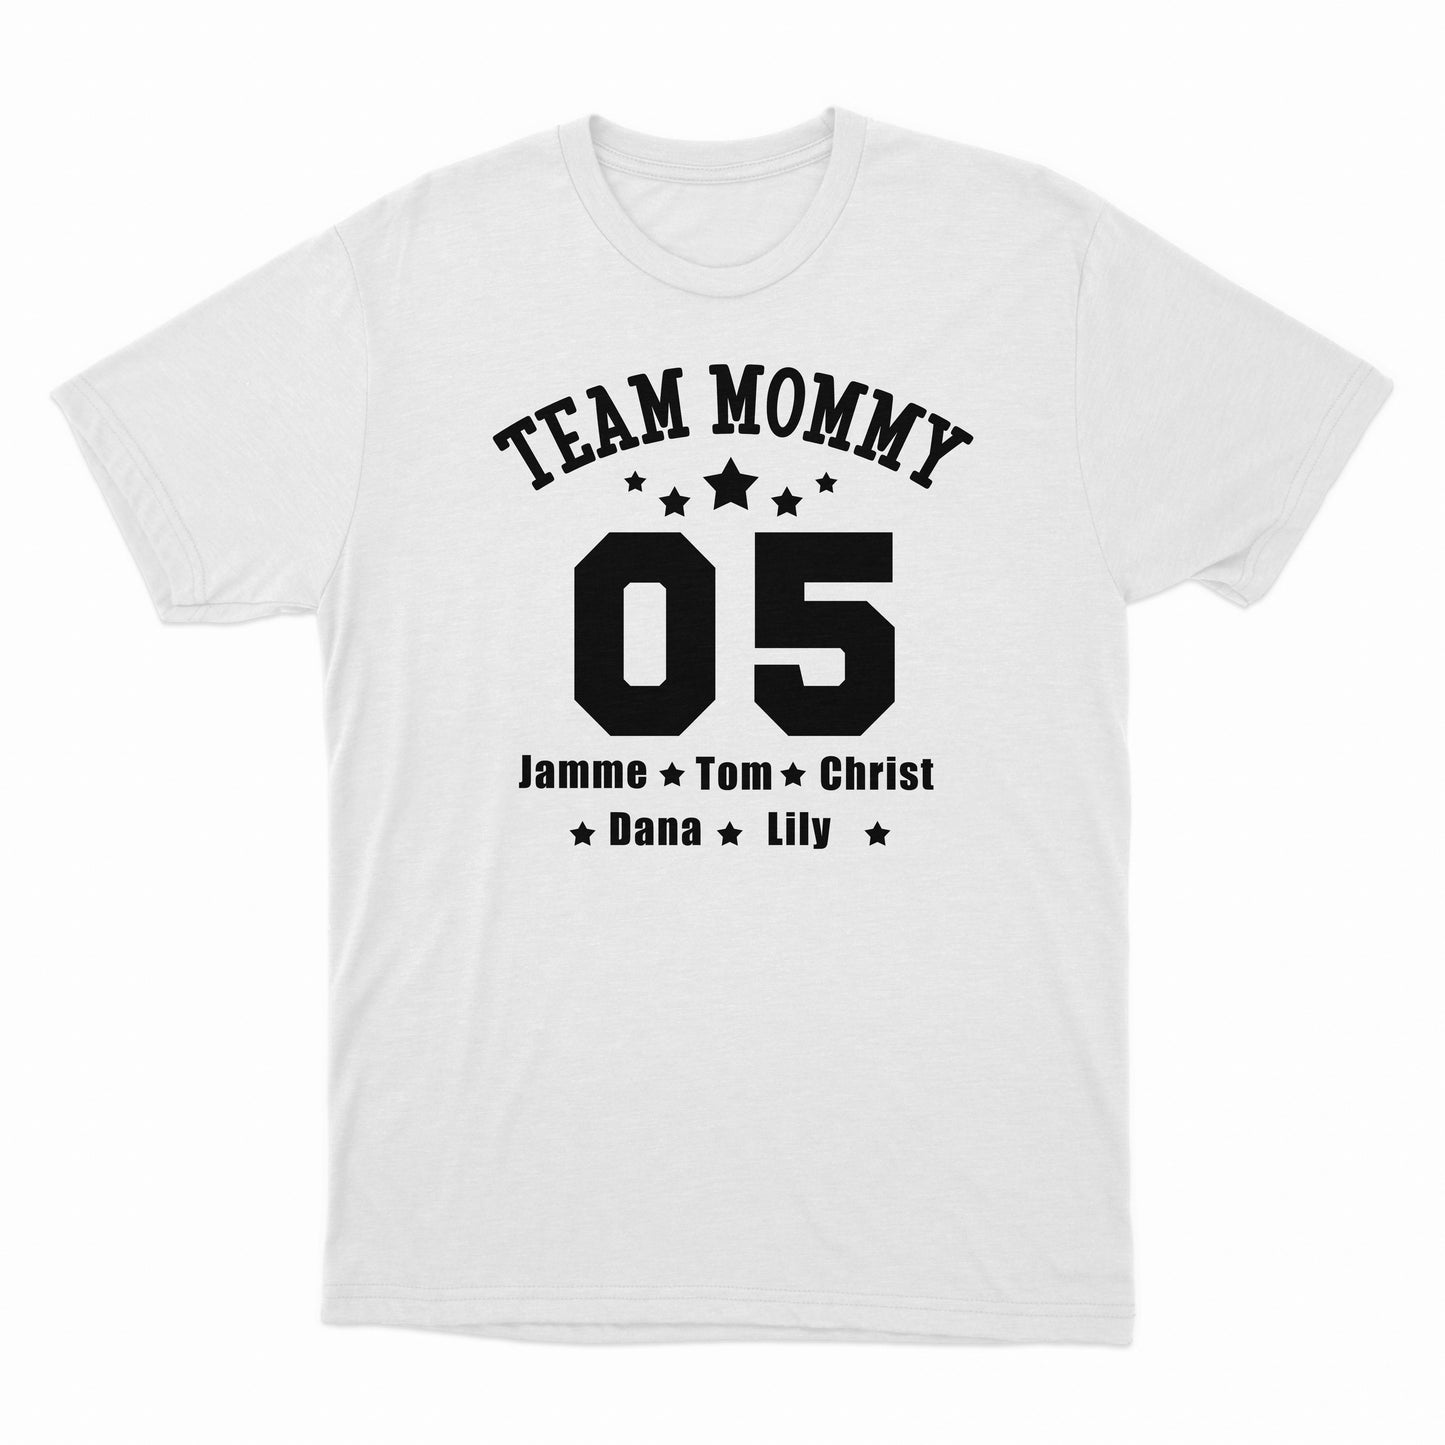 Personalized Team Mommy Nana Grandma shirt, Custom Name and Number, Personalized Sports T-Shirt, Sport Team Tee, Your Team Shirts, Toddler Name Shirts, Personalized Custom Raglan